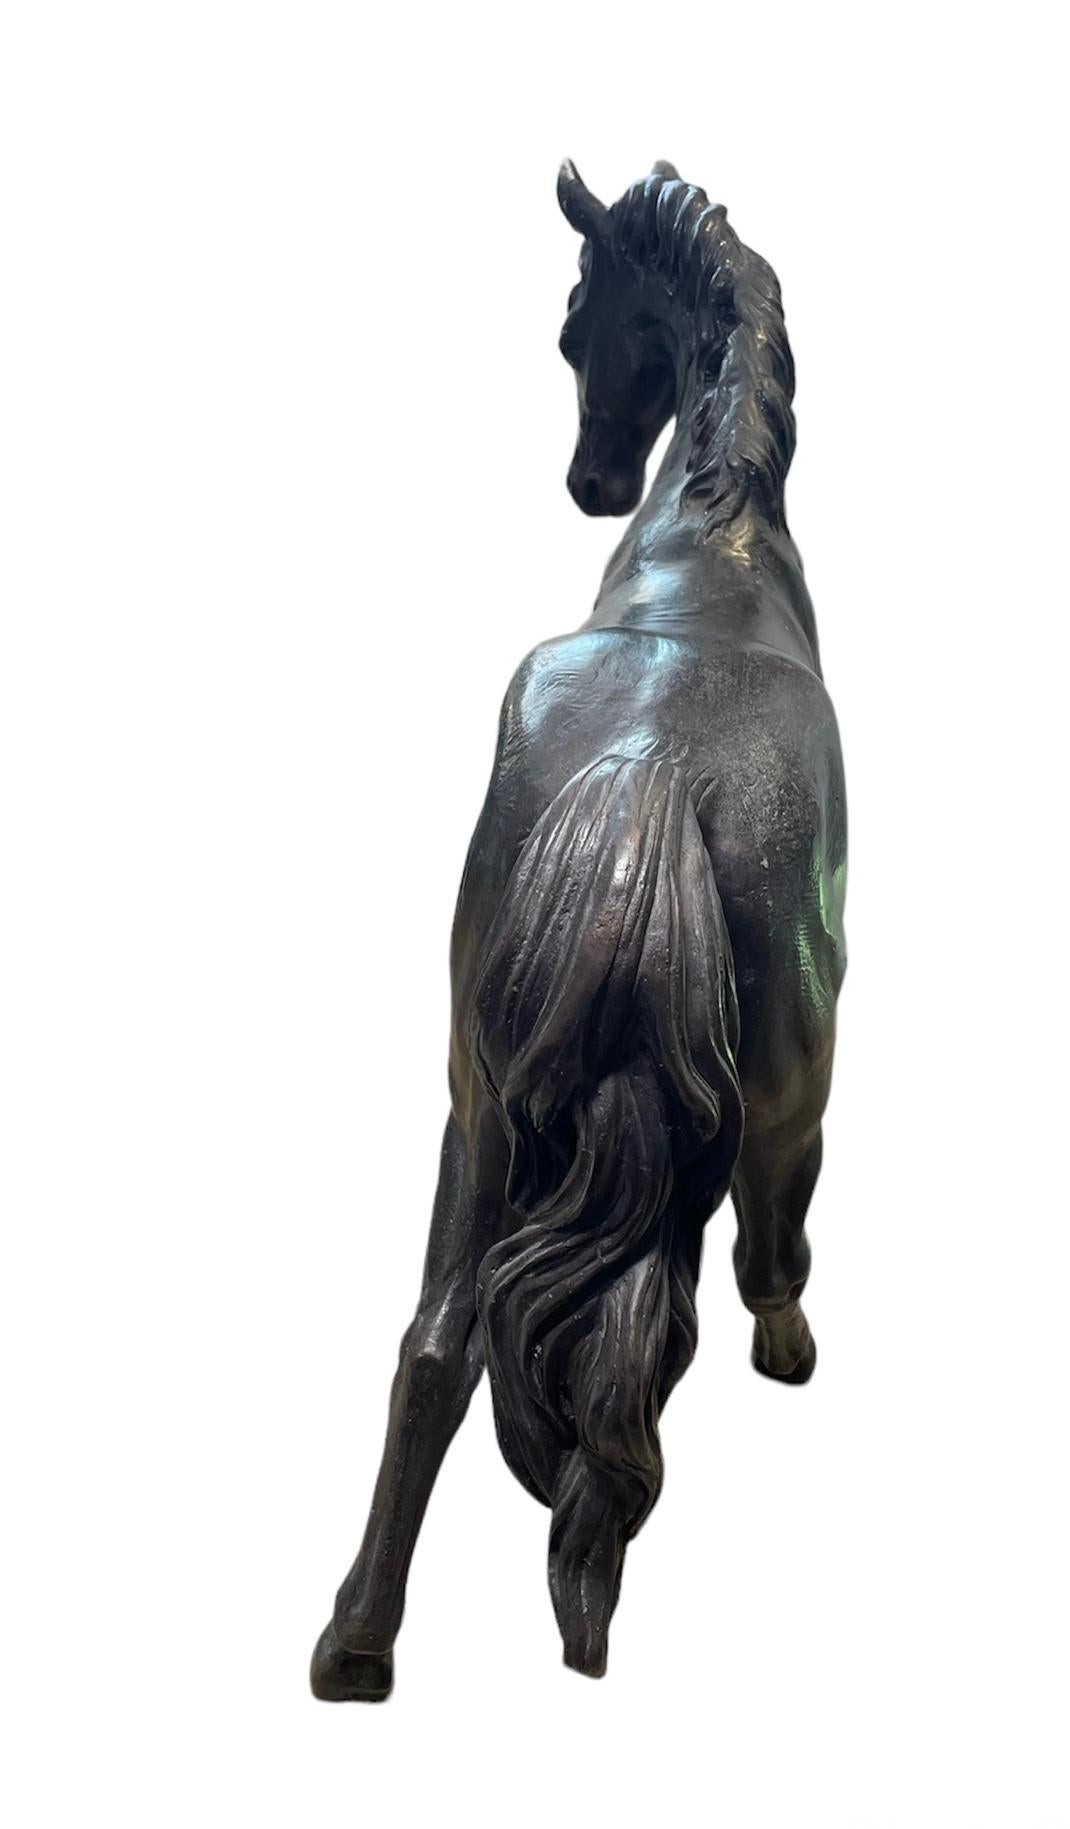 Large and Heavy Patinated Bronze Sculpture/Statue of a Horse 7